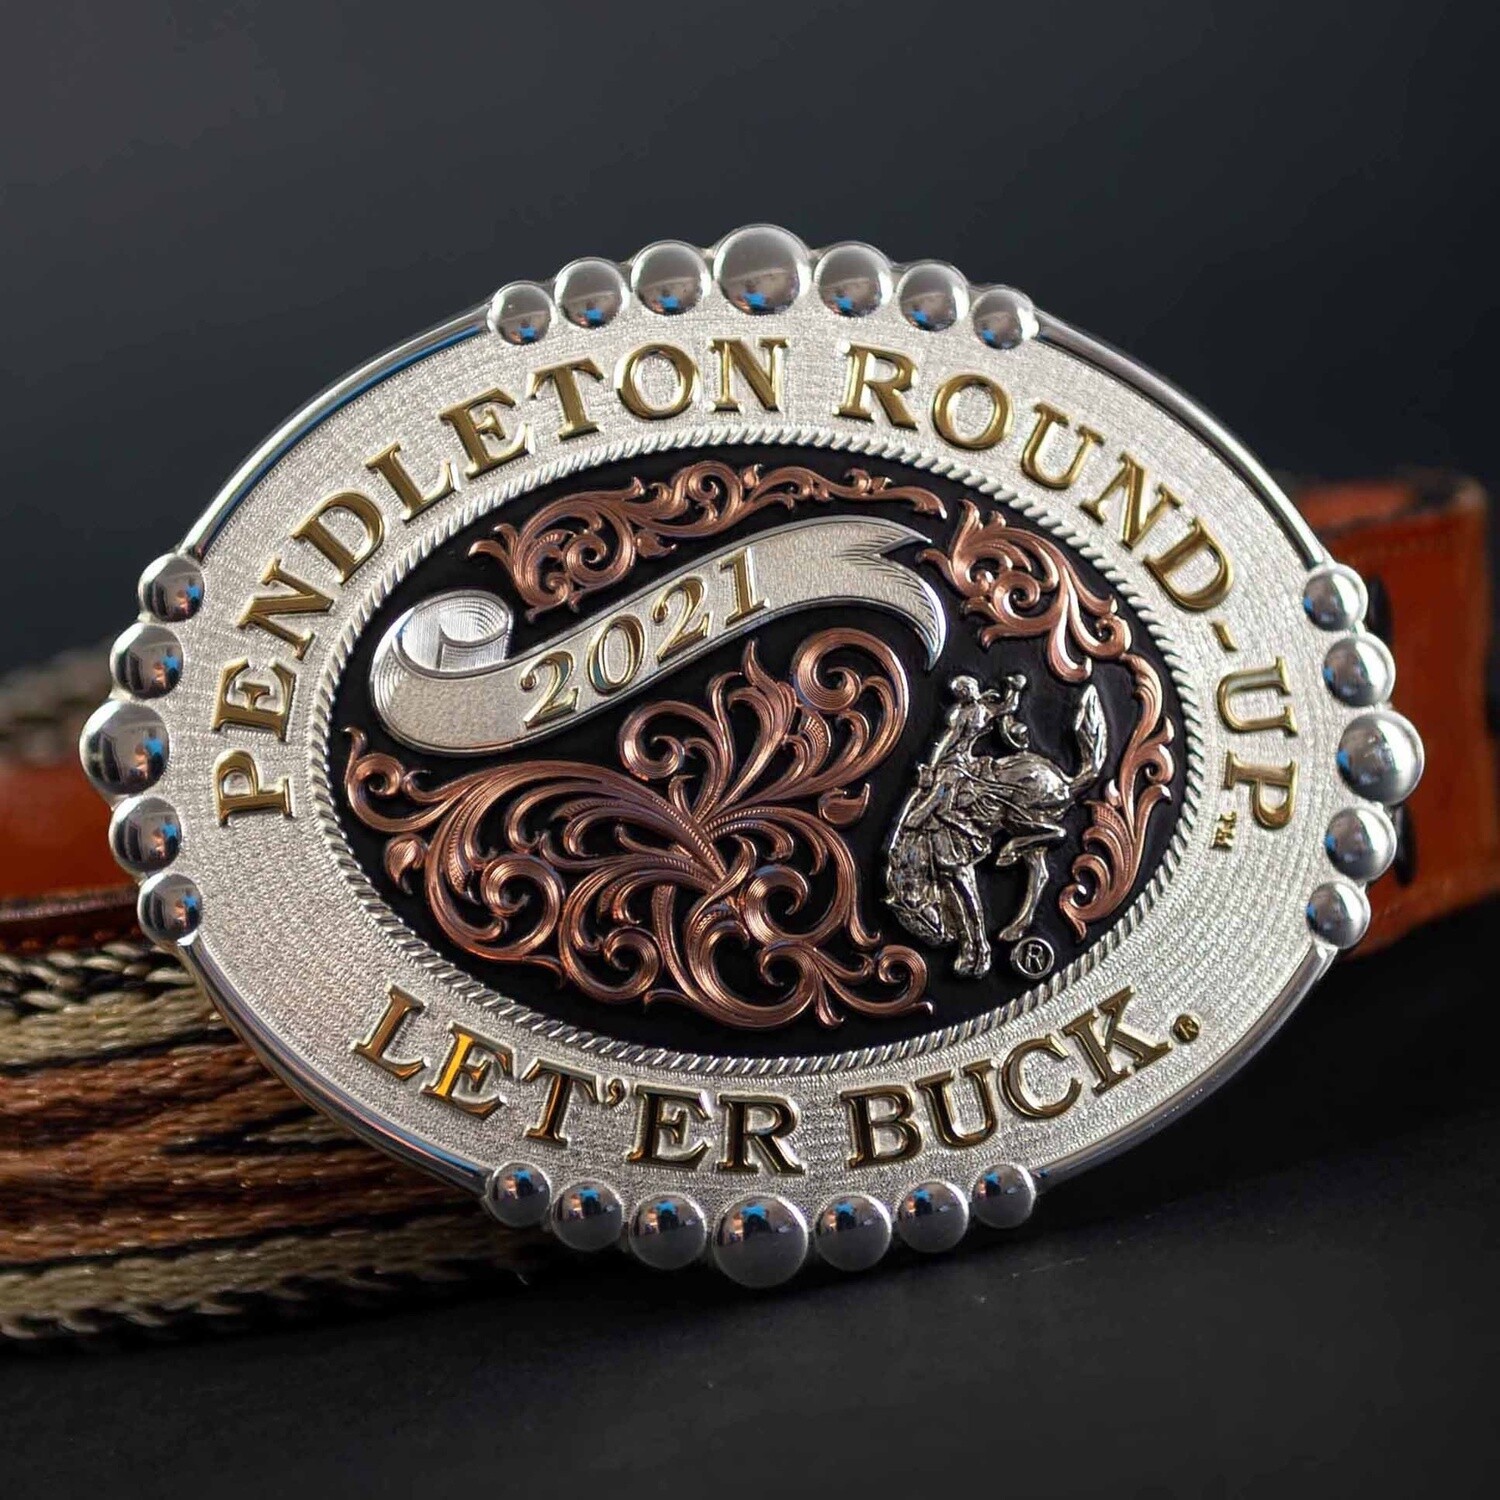 2021 Official Pendleton Round-Up Buckle